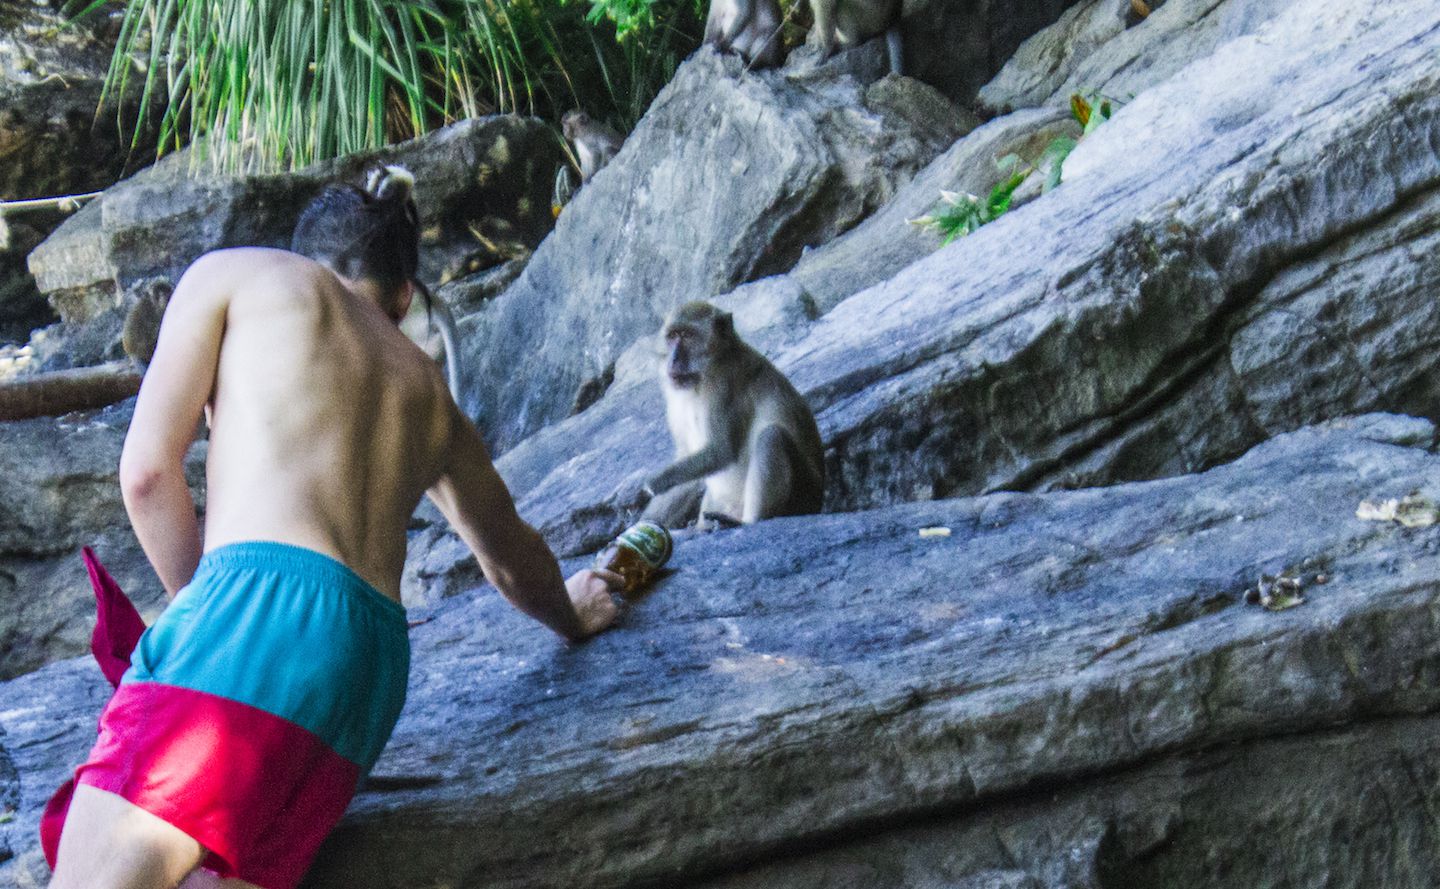 Uneducated tourist handing a bottle of beer to the monkey, Monkey Beach, Koh Phi Phi Don, Thailand